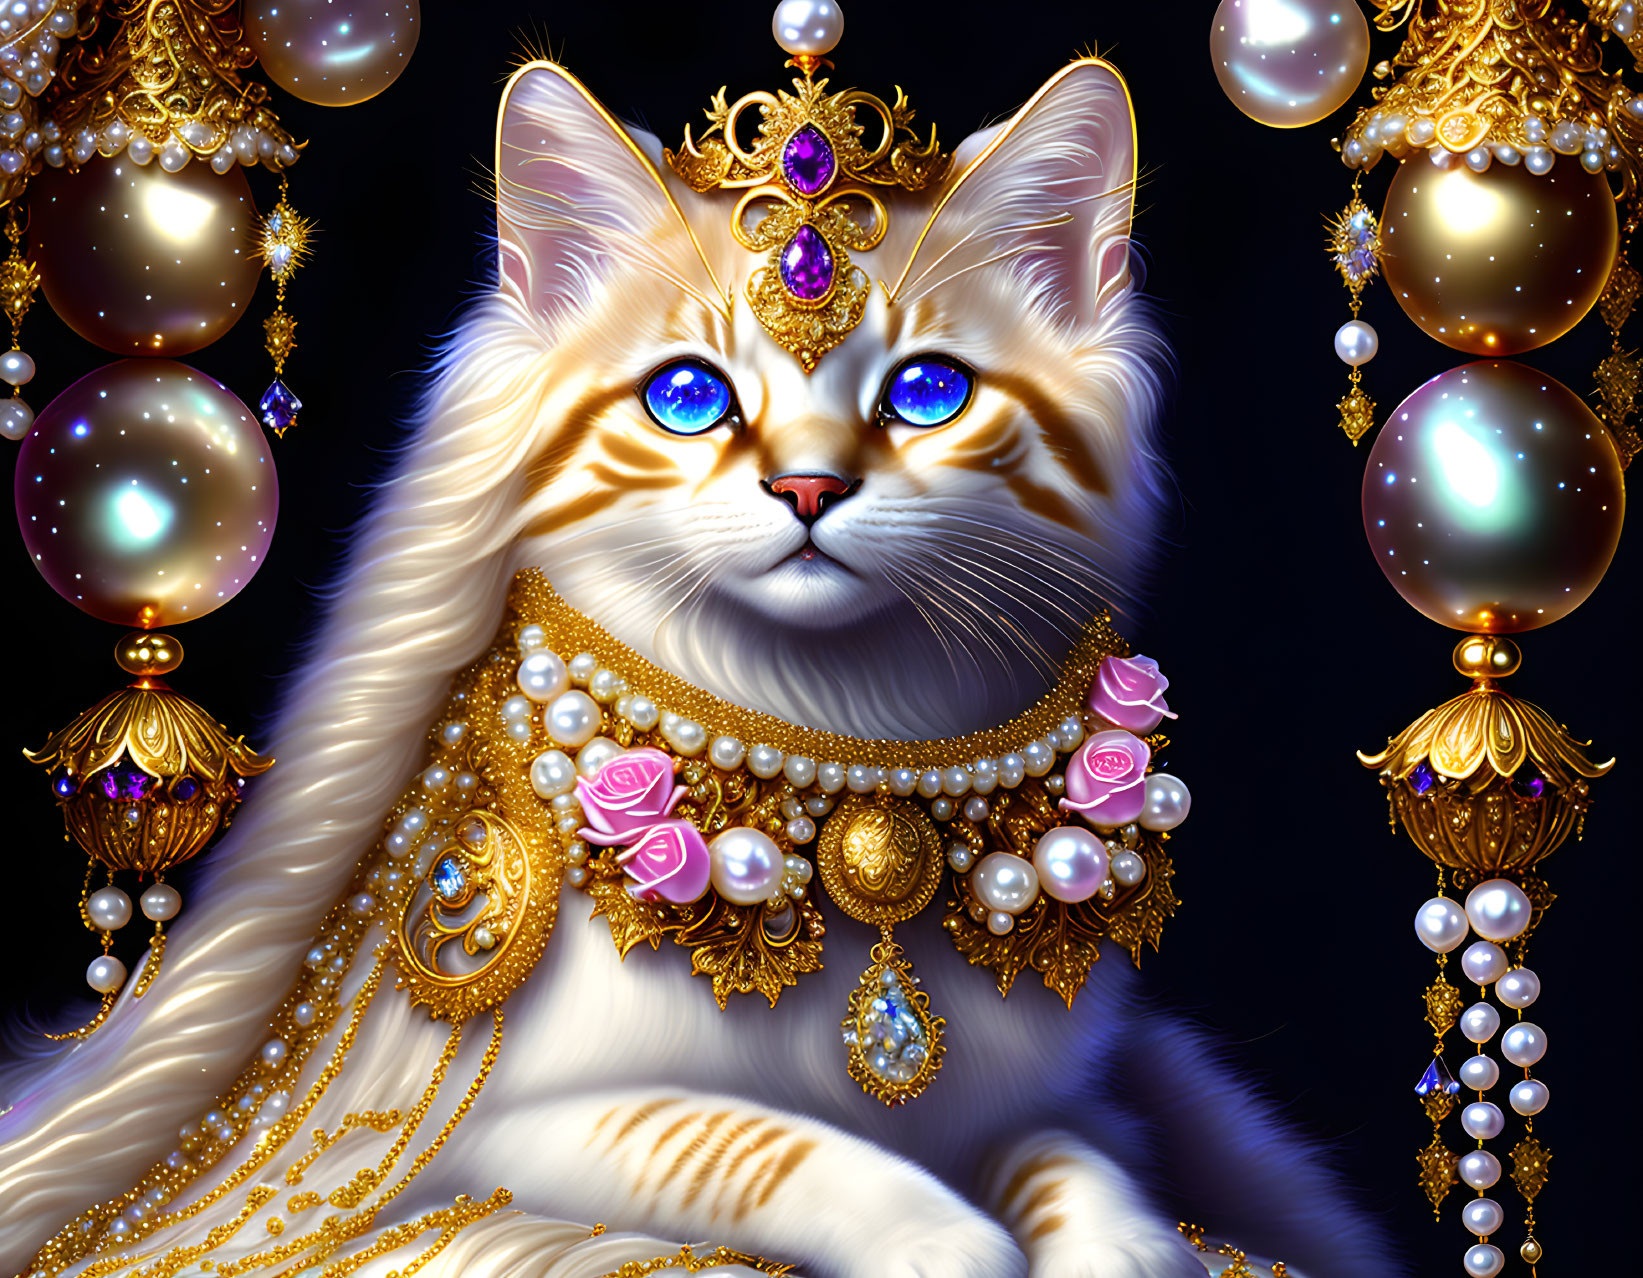 Ornately adorned cat with blue eyes and golden jewelry on dark background